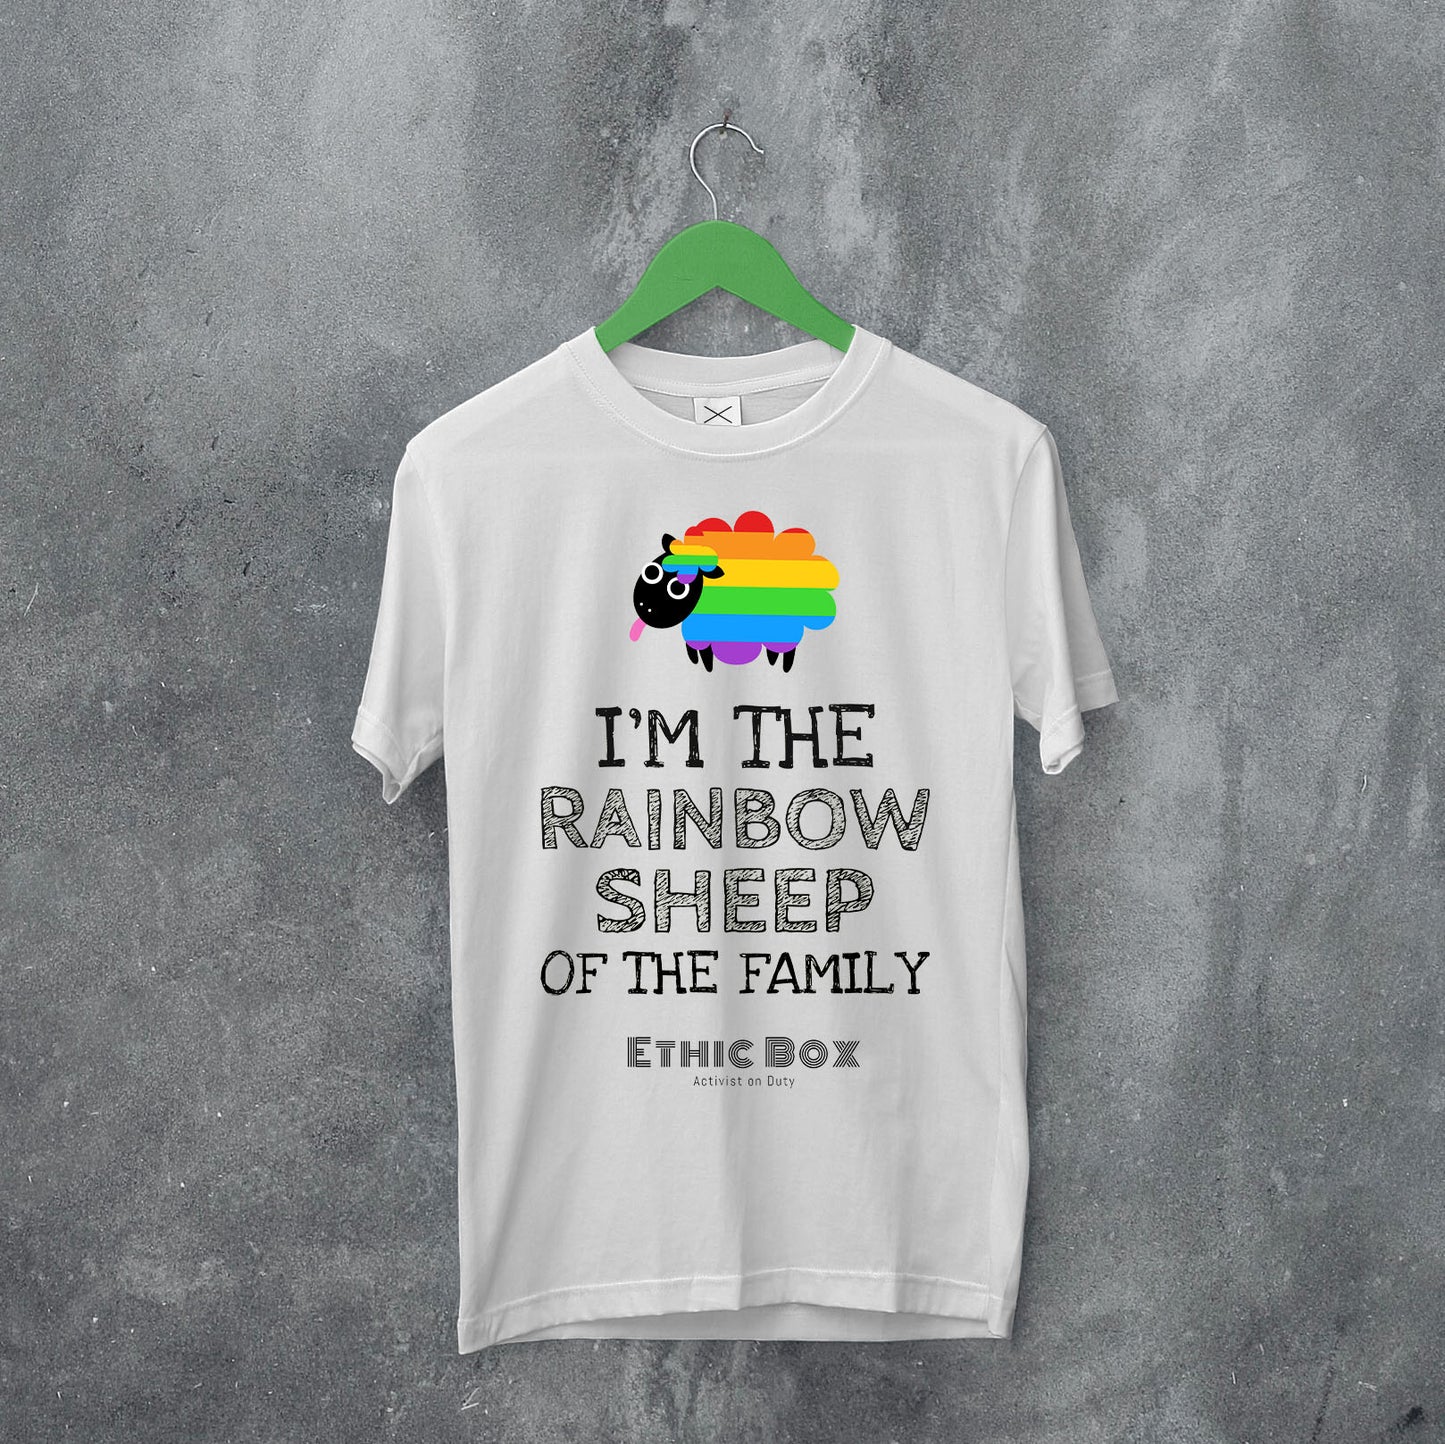 Rainbow Sheep of The Family - Unisex fit